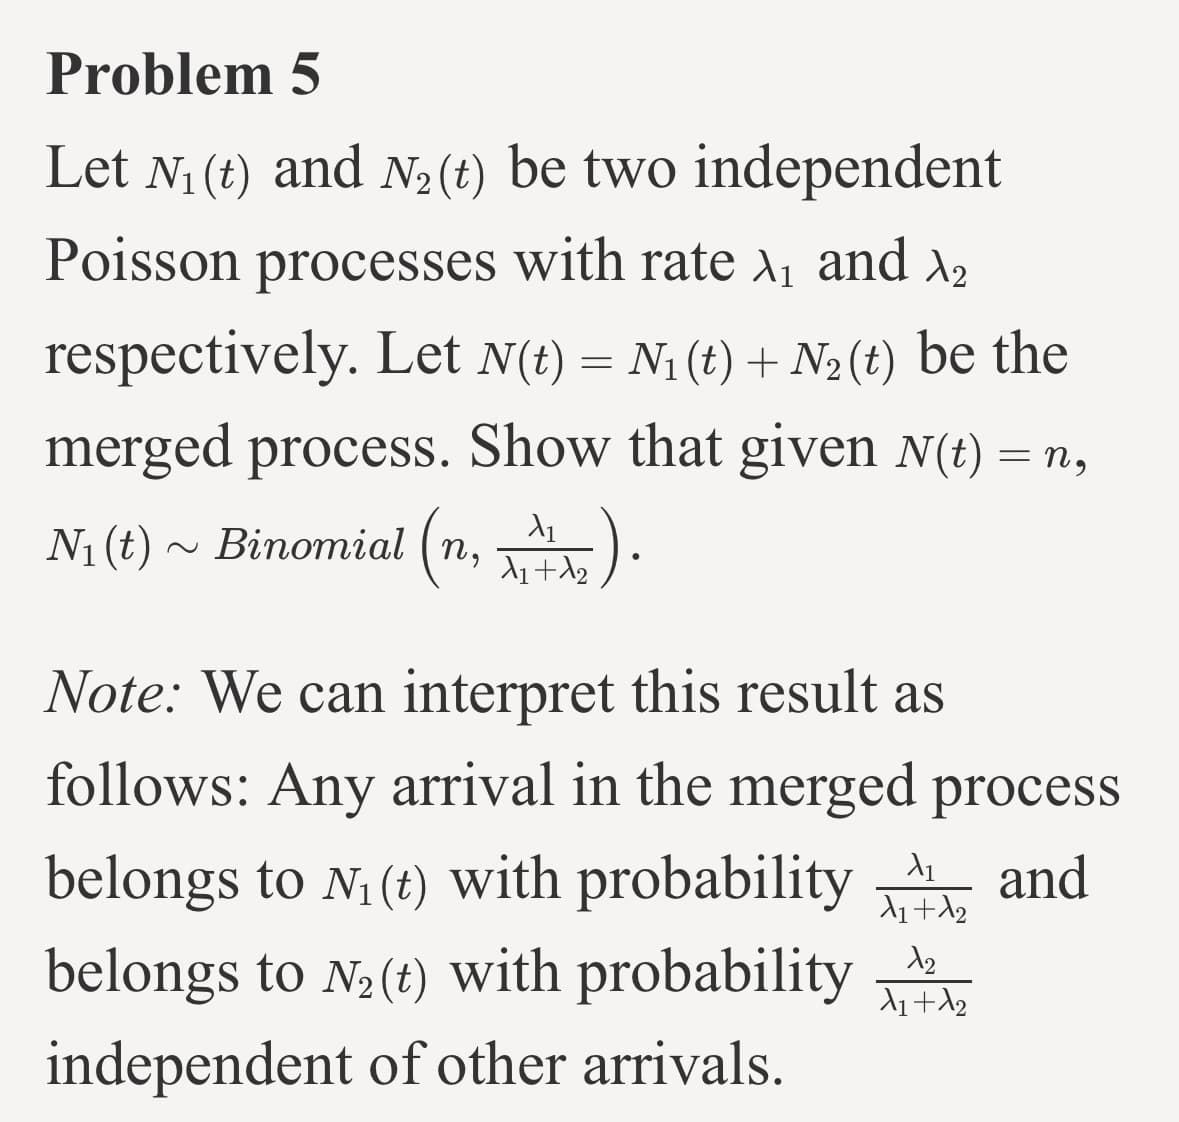 Problem 5
Let N₁ (t) and N₂ (t) be two independent
Poisson processes with rate ₁ and ₂
respectively. Let N(t) = N₁ (t) + N₂ (t) be the
merged process. Show that given N(t) = n,
N₁ (t) ~ Binomial (n,1₂).
Note: We can interpret this result as
follows: Any arrival in the merged process
and
belongs to N₁ (t) with probability
belongs to N₂(t) with probability
independent of other arrivals.
X₁
X₁ + A₂
12
X₁ + X2